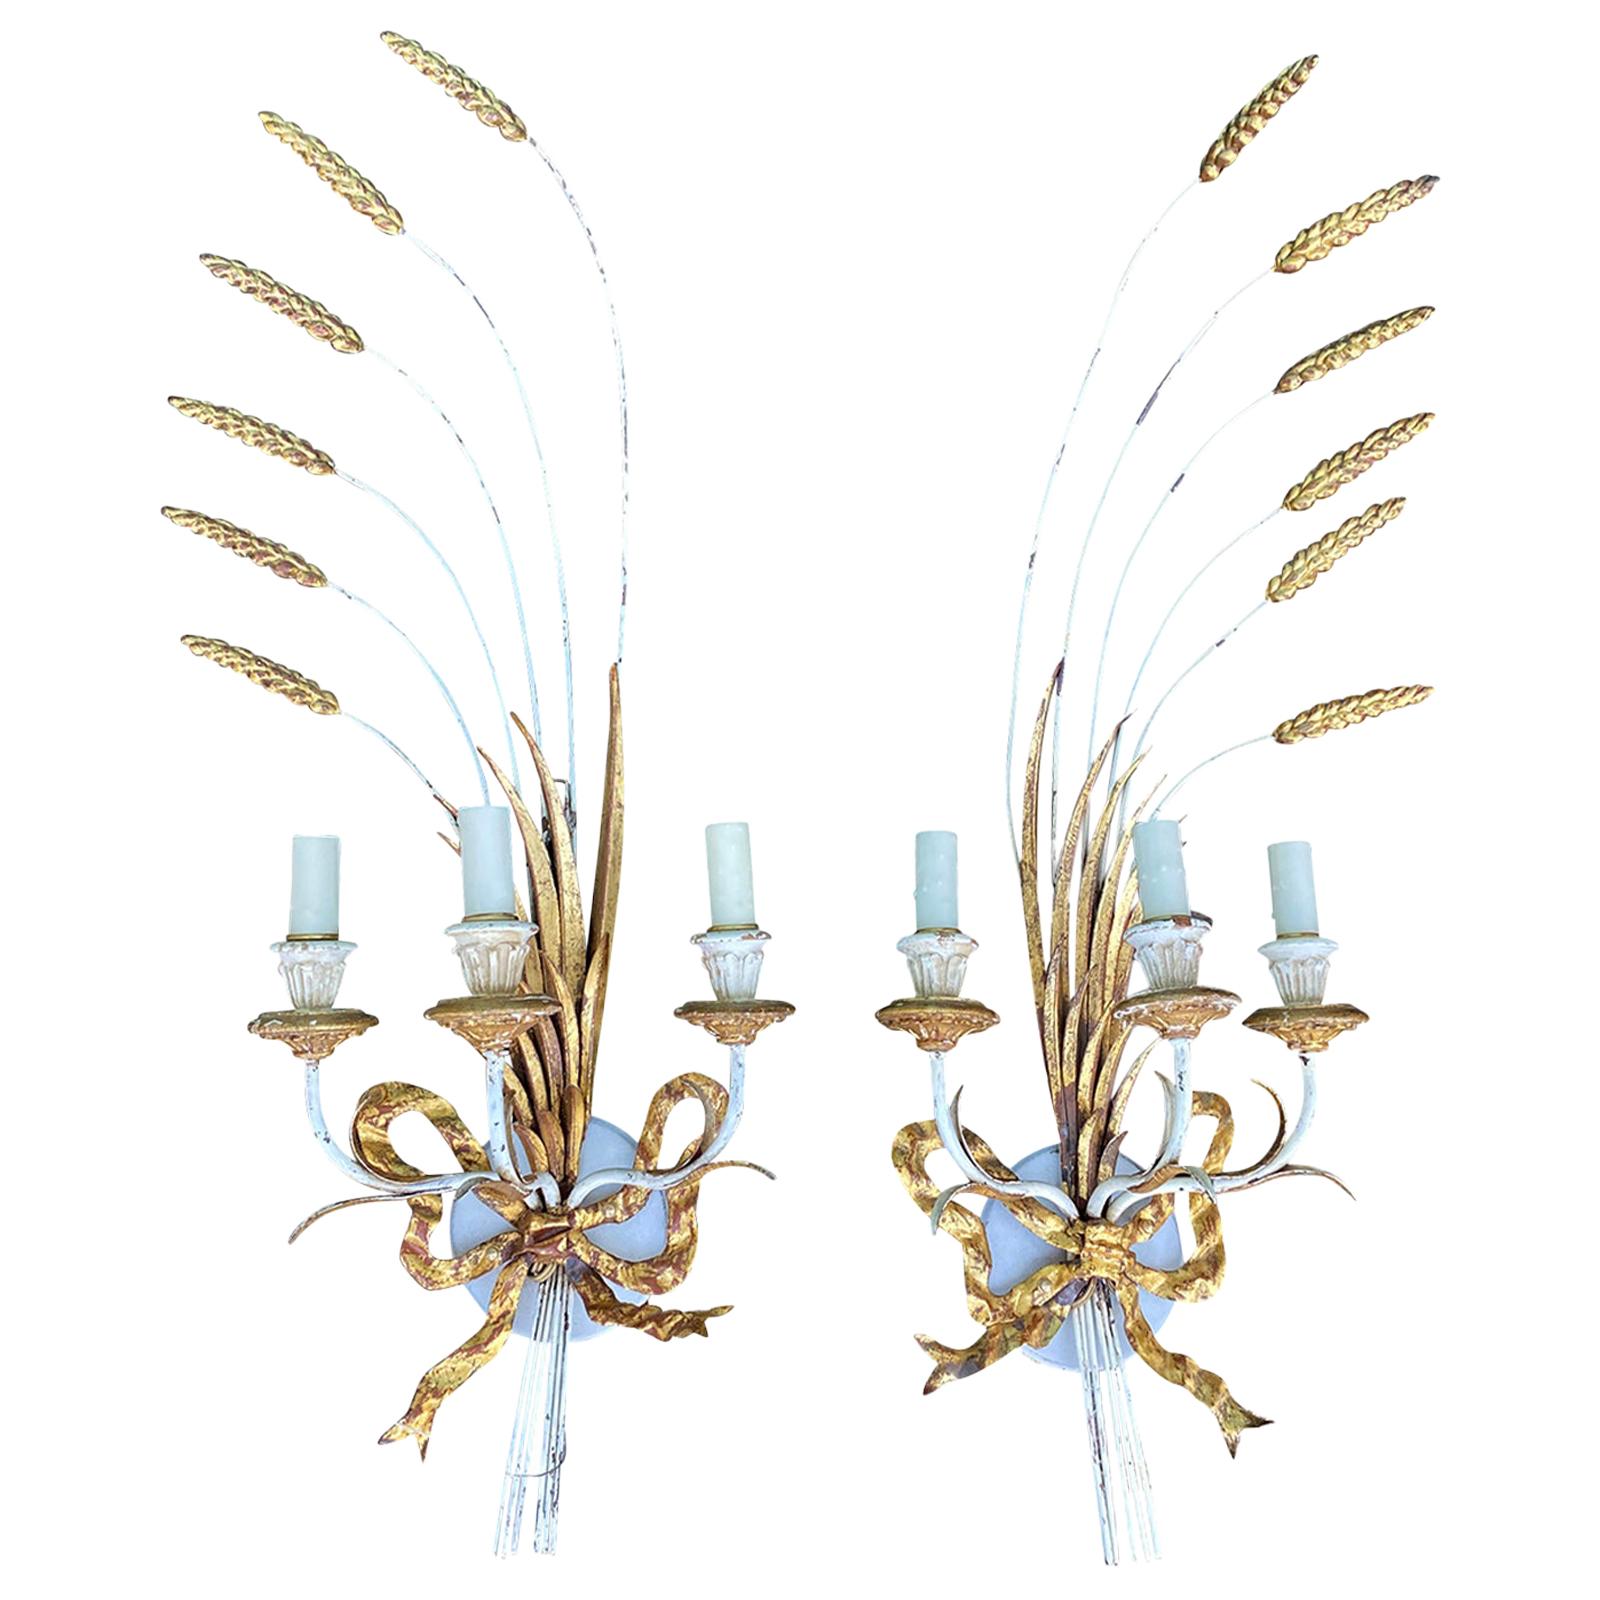 Pair of Mid-20th Century Parcel Gilt Metal and Wood Three-Arm Wheat Sconces For Sale